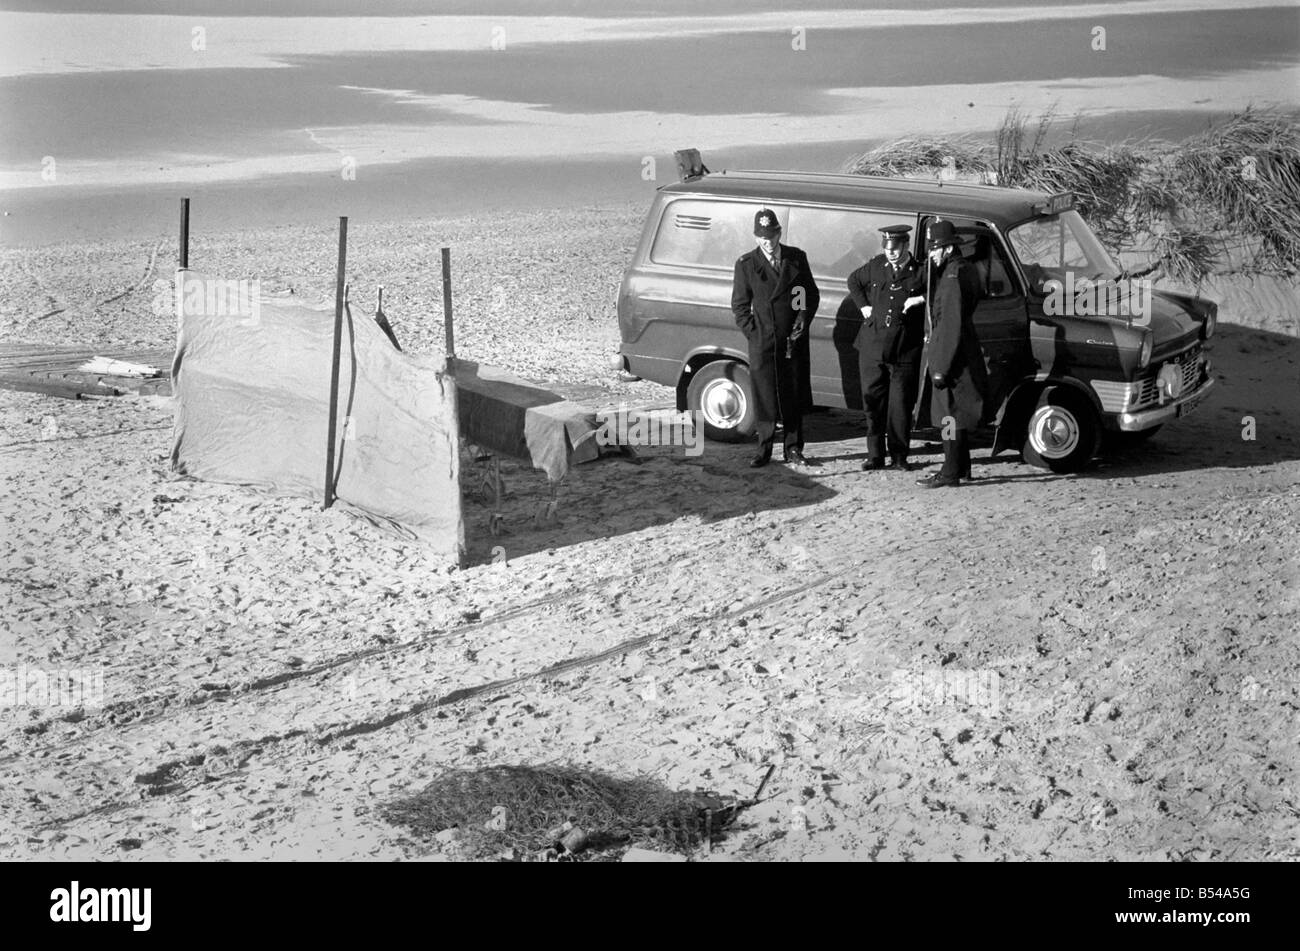 Dead woman found on beach at St. Anness. Scene of the tragedy showing burned out remains of what appears to be a mattress, a coffin behind screens, and a police van at the scene, guarded by policemen. ;November 1969 ;Z10766-007 Stock Photo